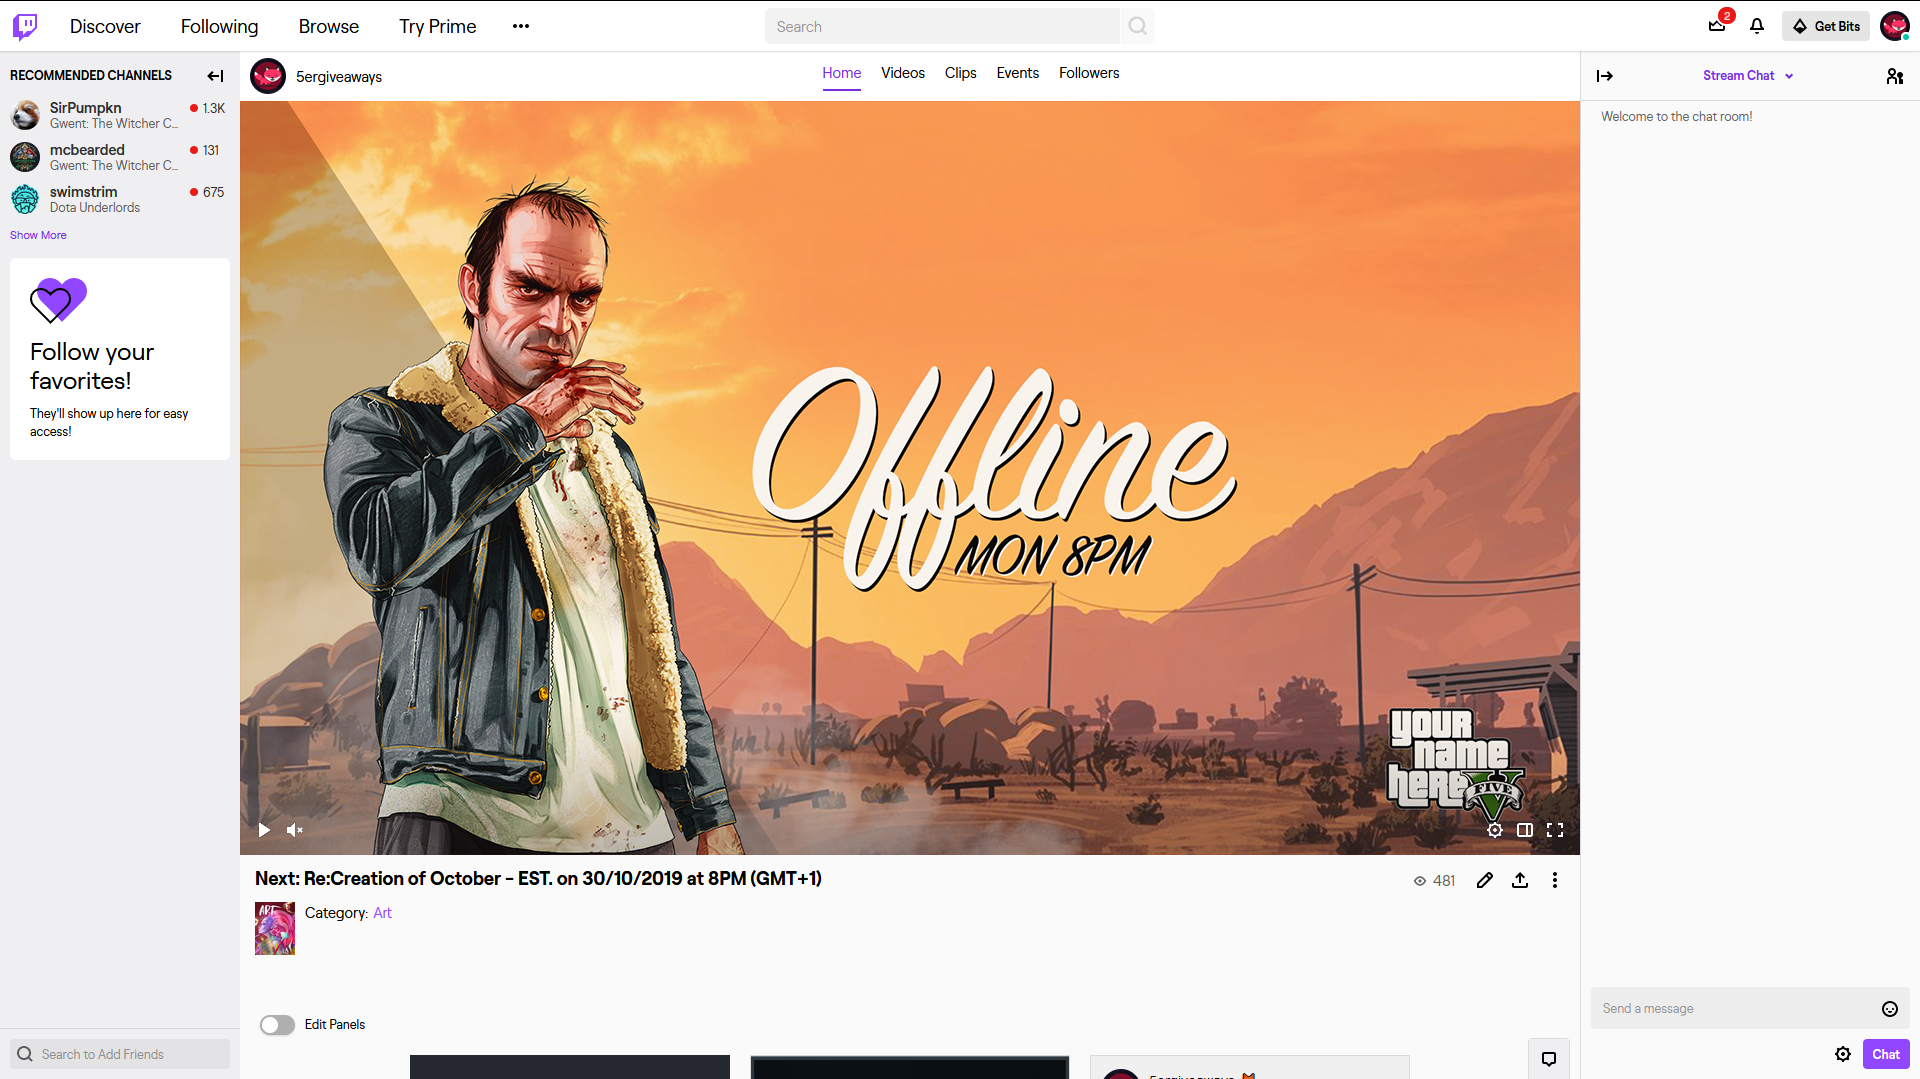 GTA V Live Twitch Example